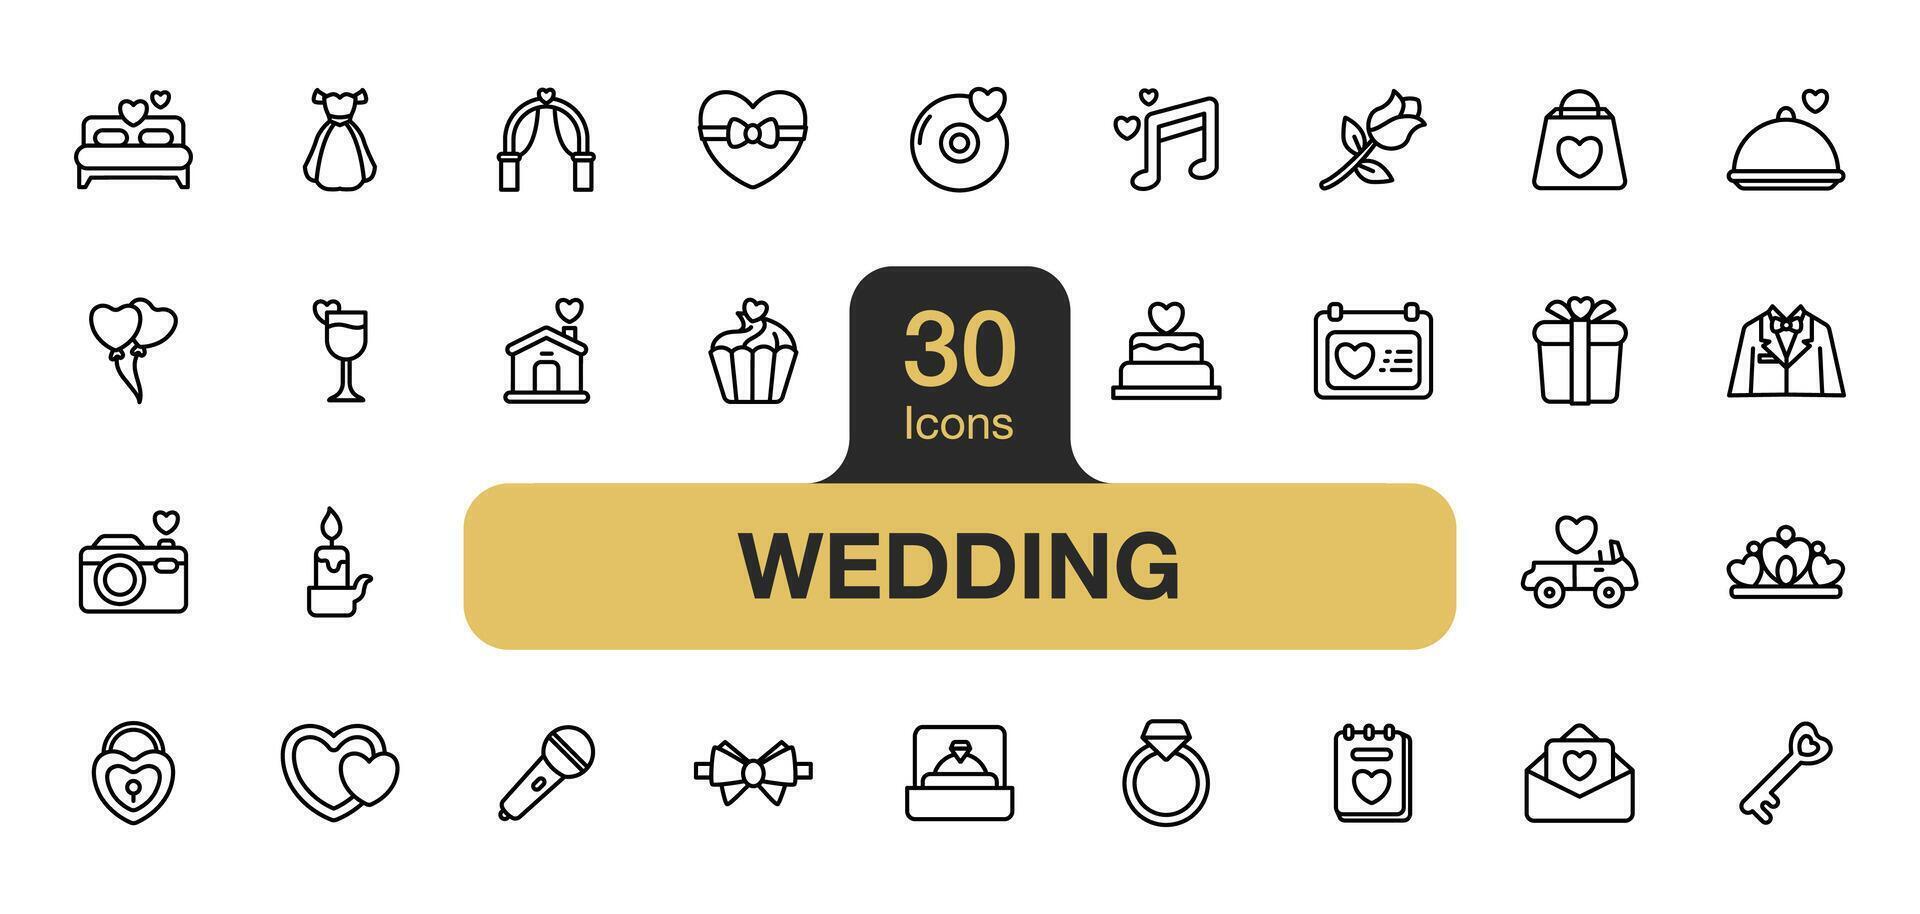 Set of 30 Wedding icon element set. Includes love, ring, cake, rose, candle, crown, and More. Outline icons vector collection.